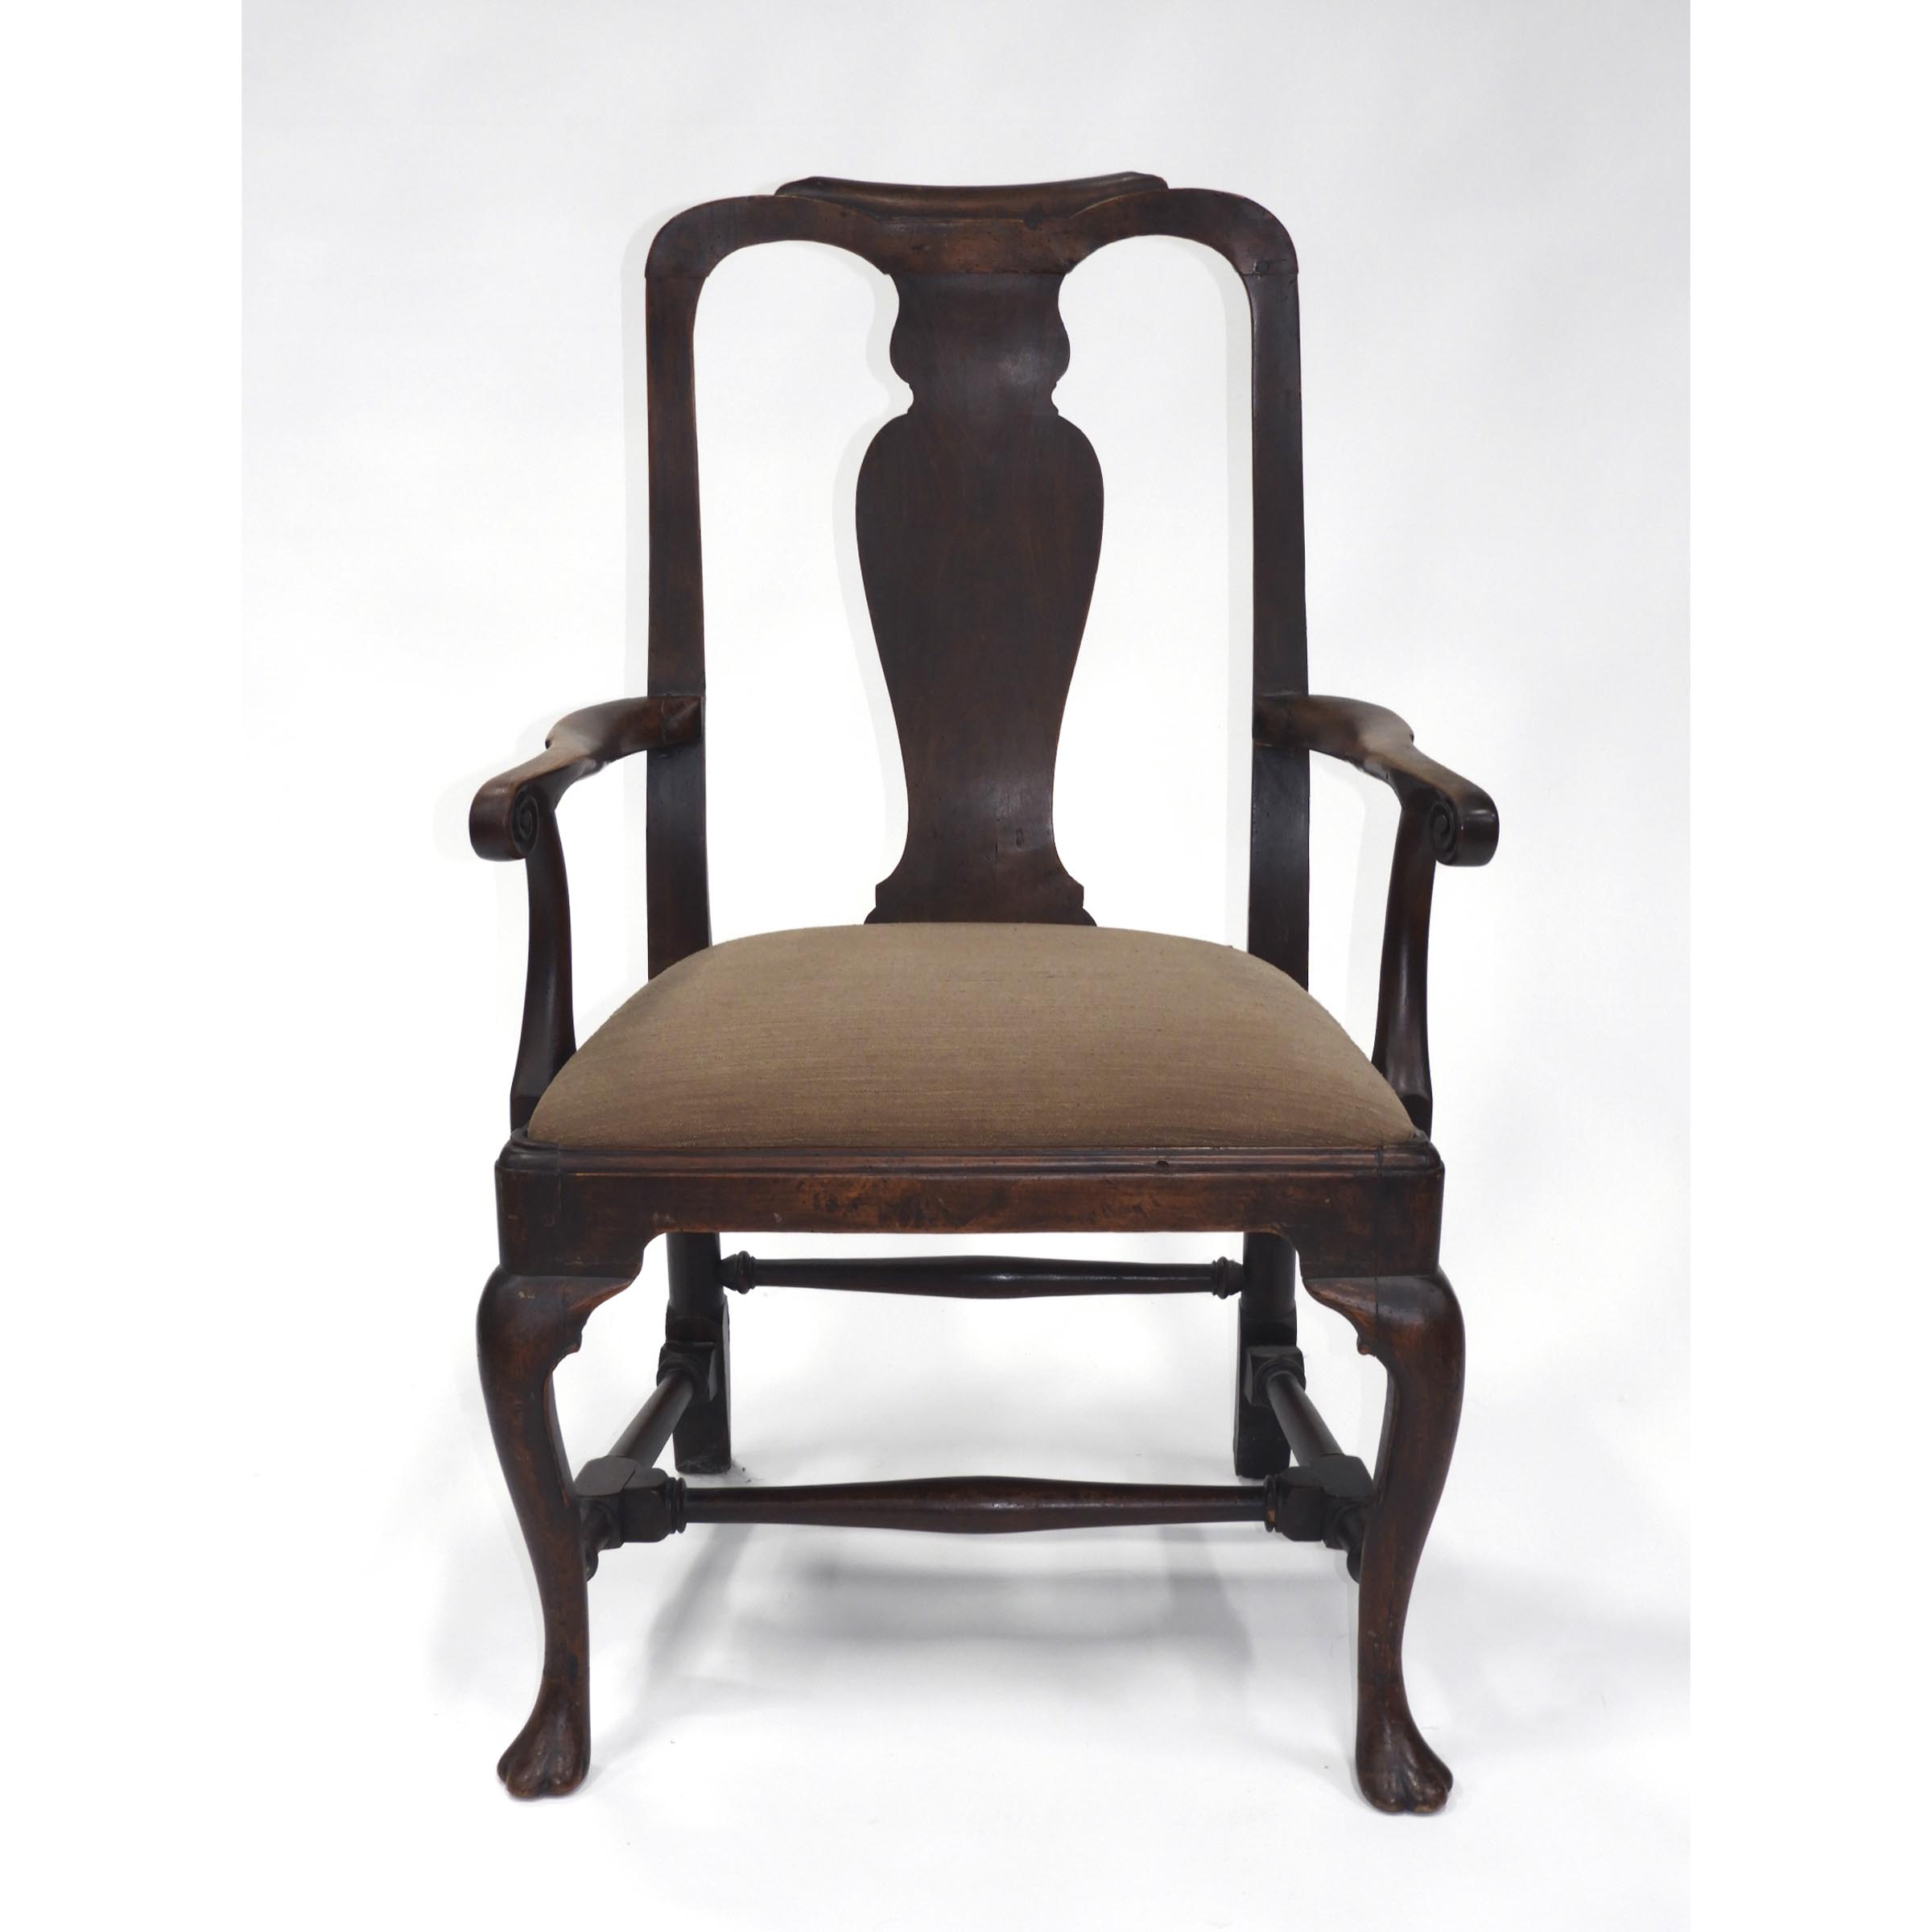 Queen Anne Style Open Armchair, early 18th century and later